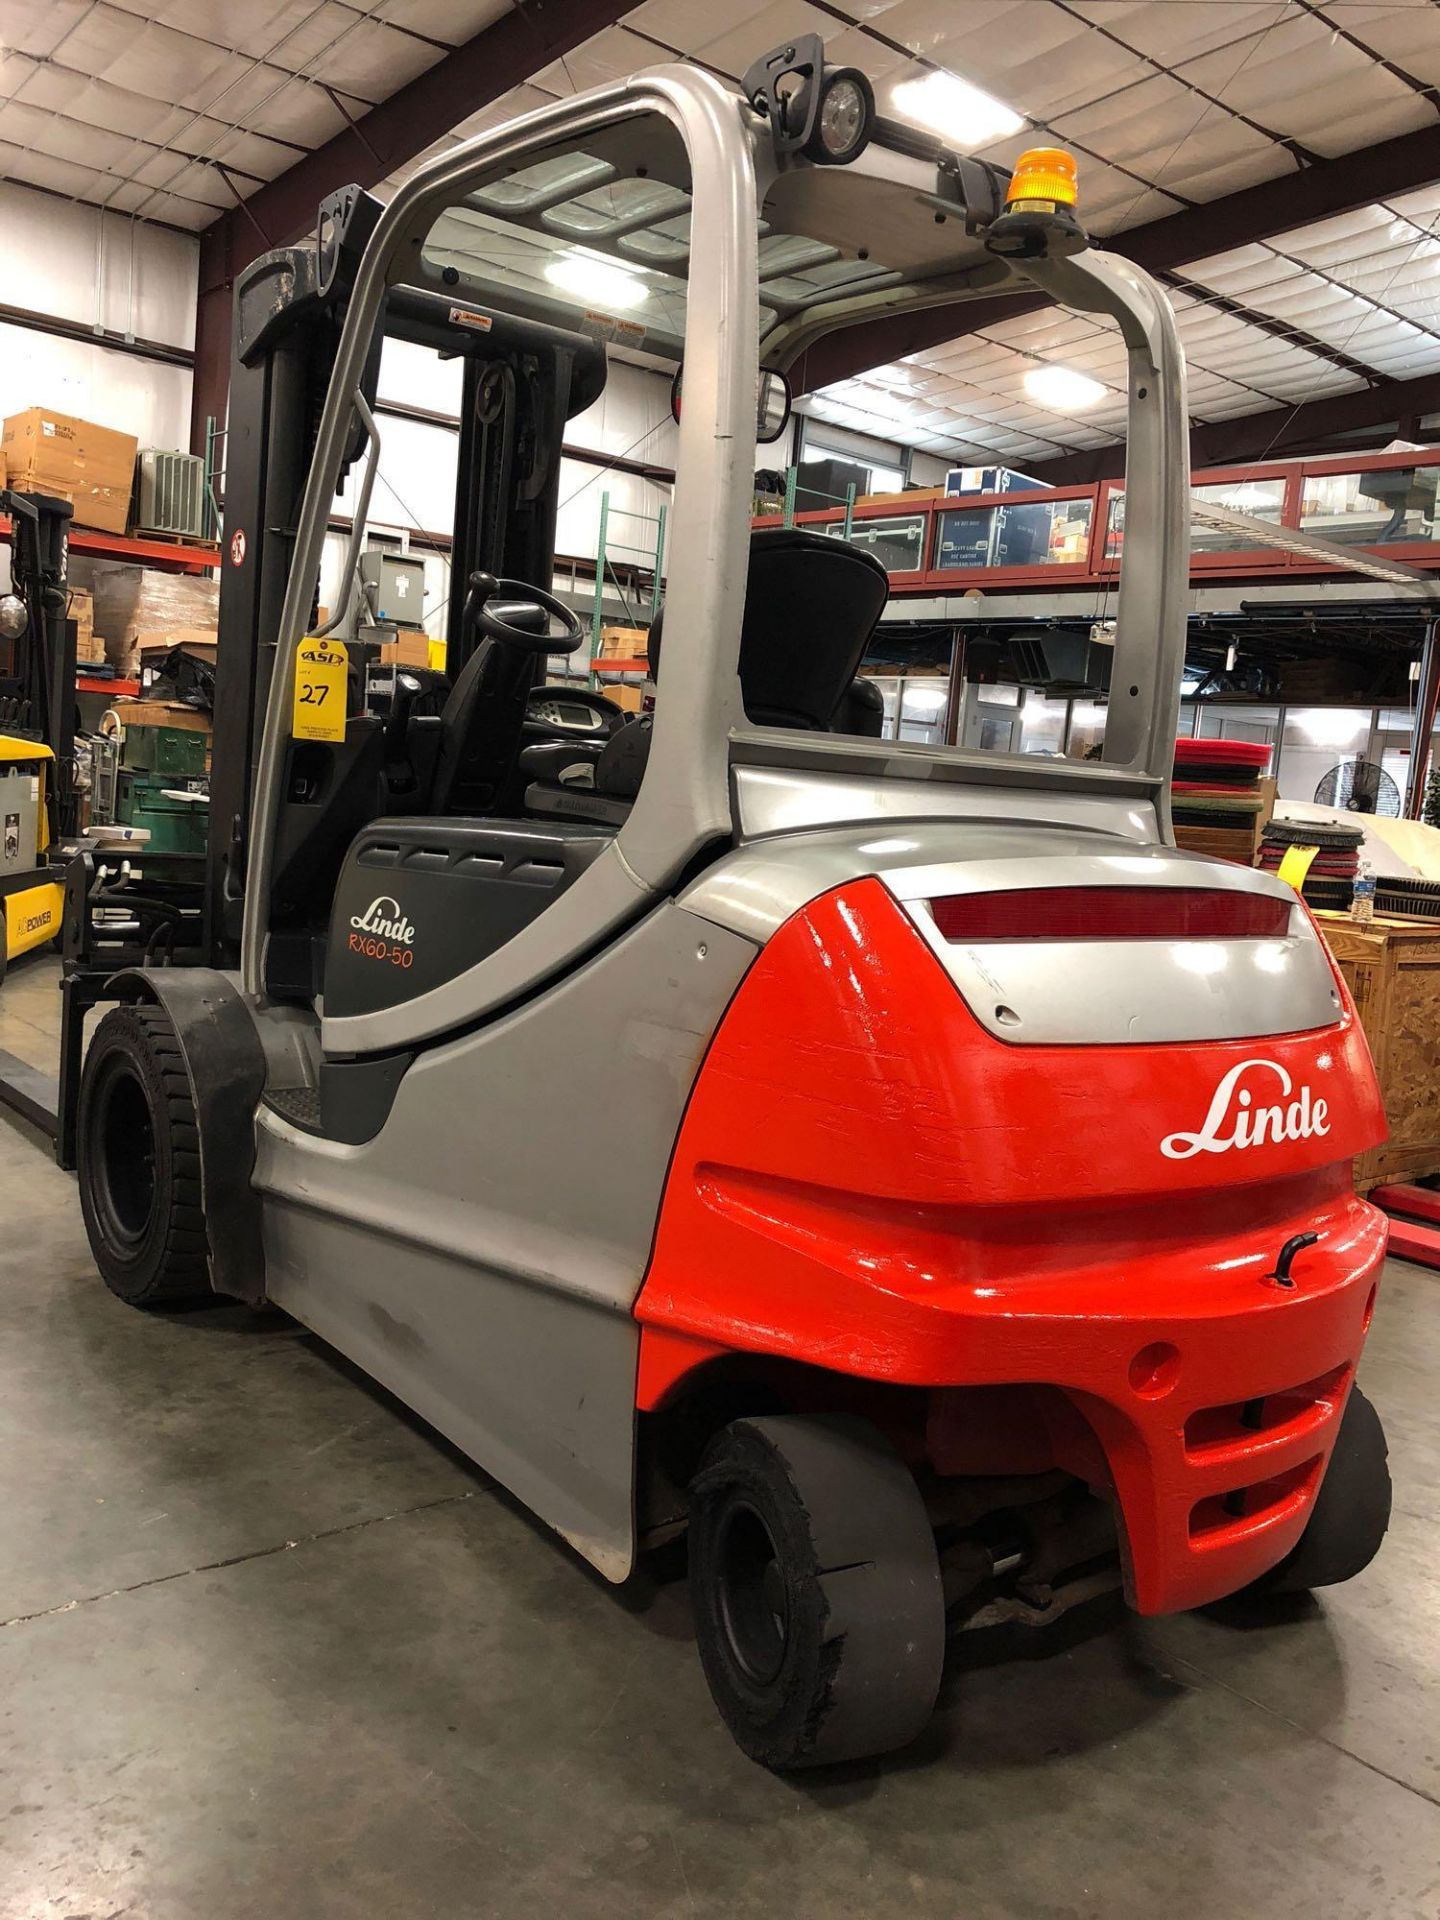 2009 LINDE ELECTRIC FORKLIFT MODEL RX60-50, 8,000 LB WEIGHT CAP - Image 8 of 12